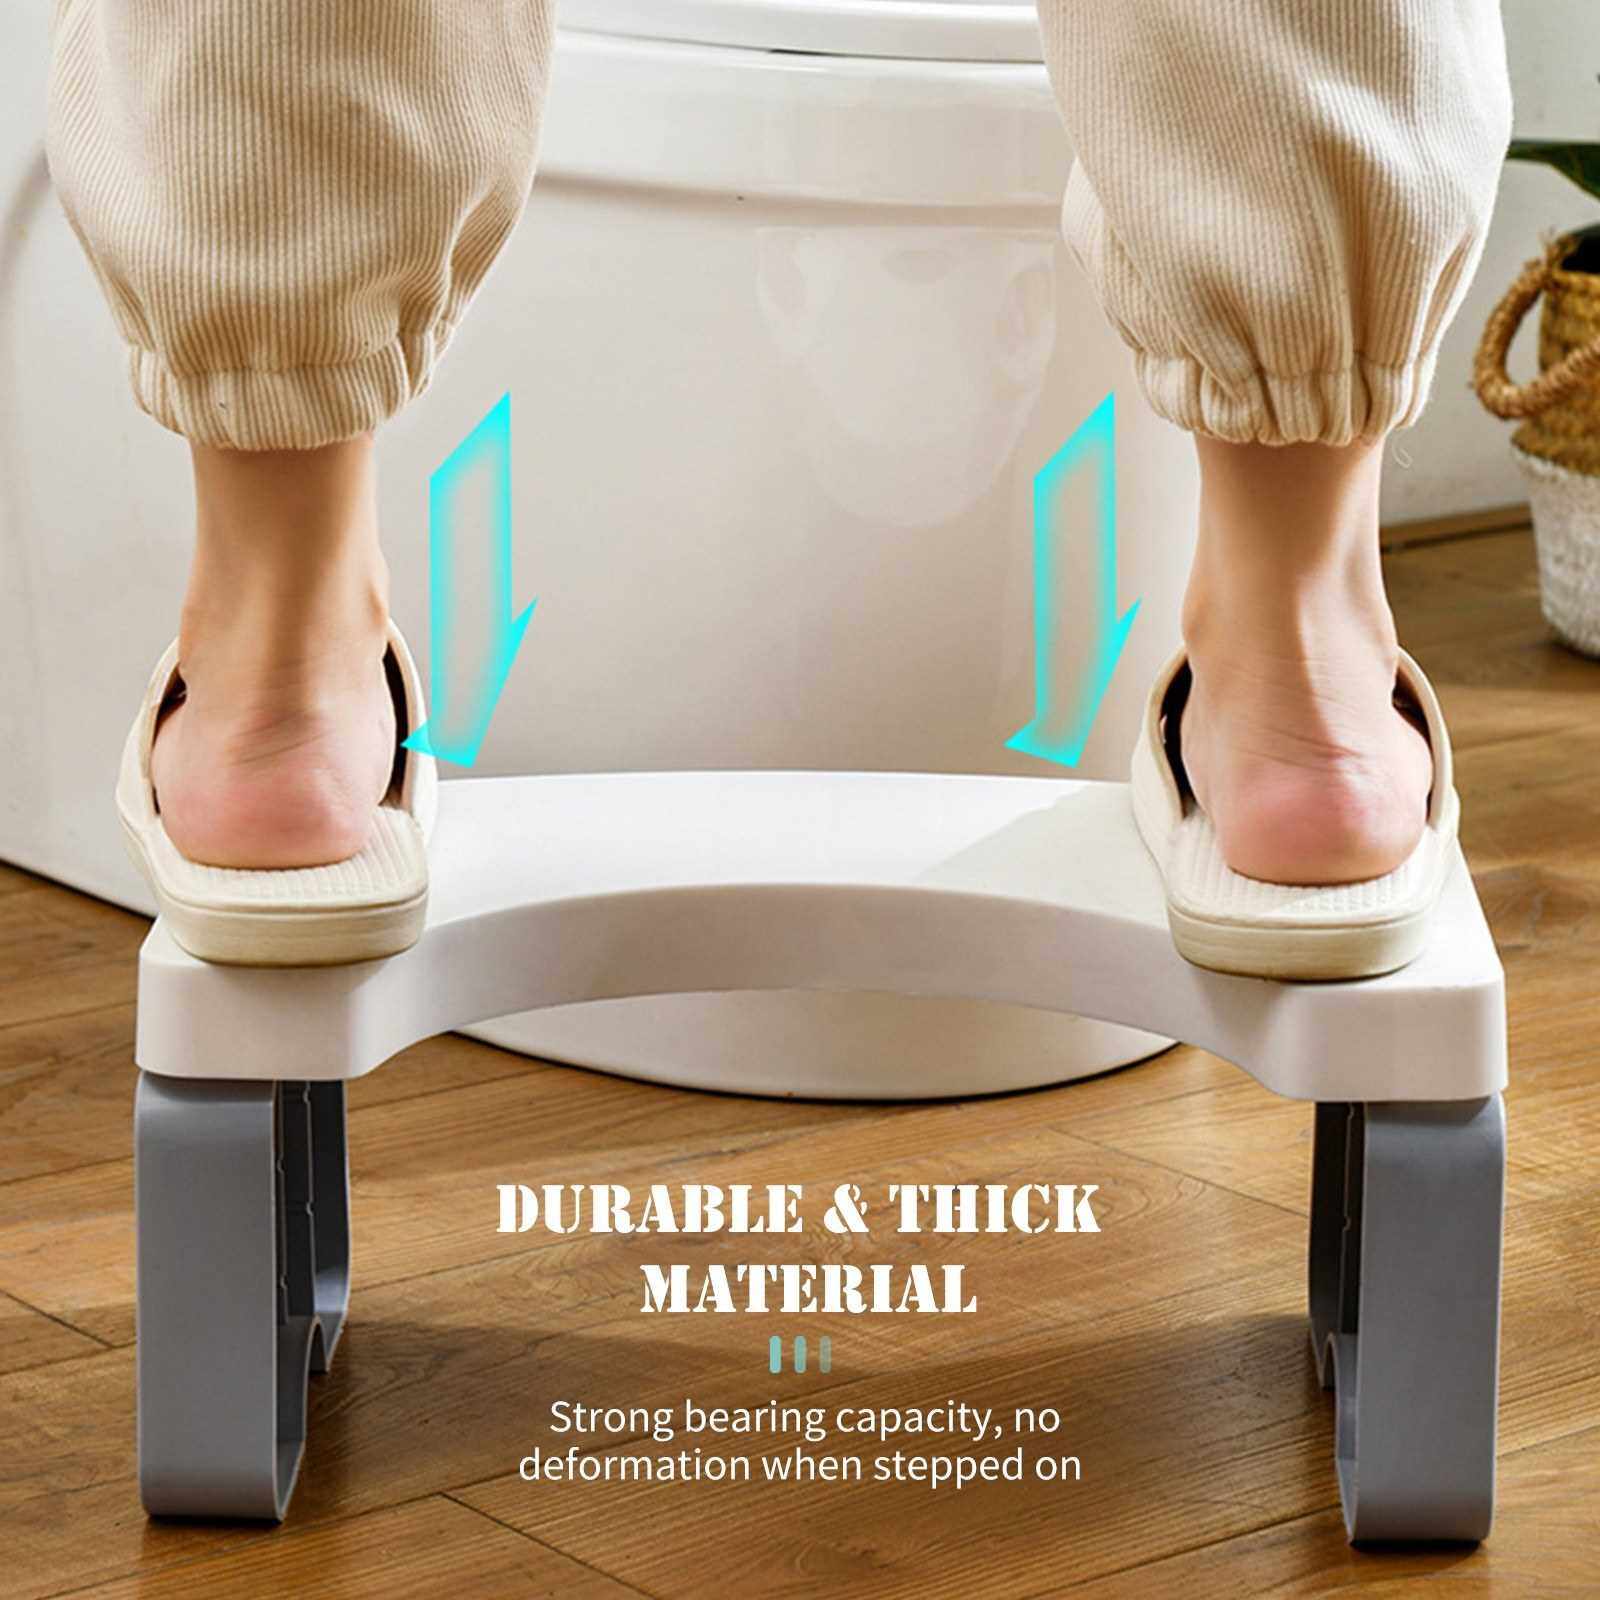 Detachable Toilet Stool with Non-Slip Base Splicable Potty Step Stool Sitting Posture Foot Stool Bathroom Toilet Potty Stool for Kids Adults Pregnant Woman (Blue)